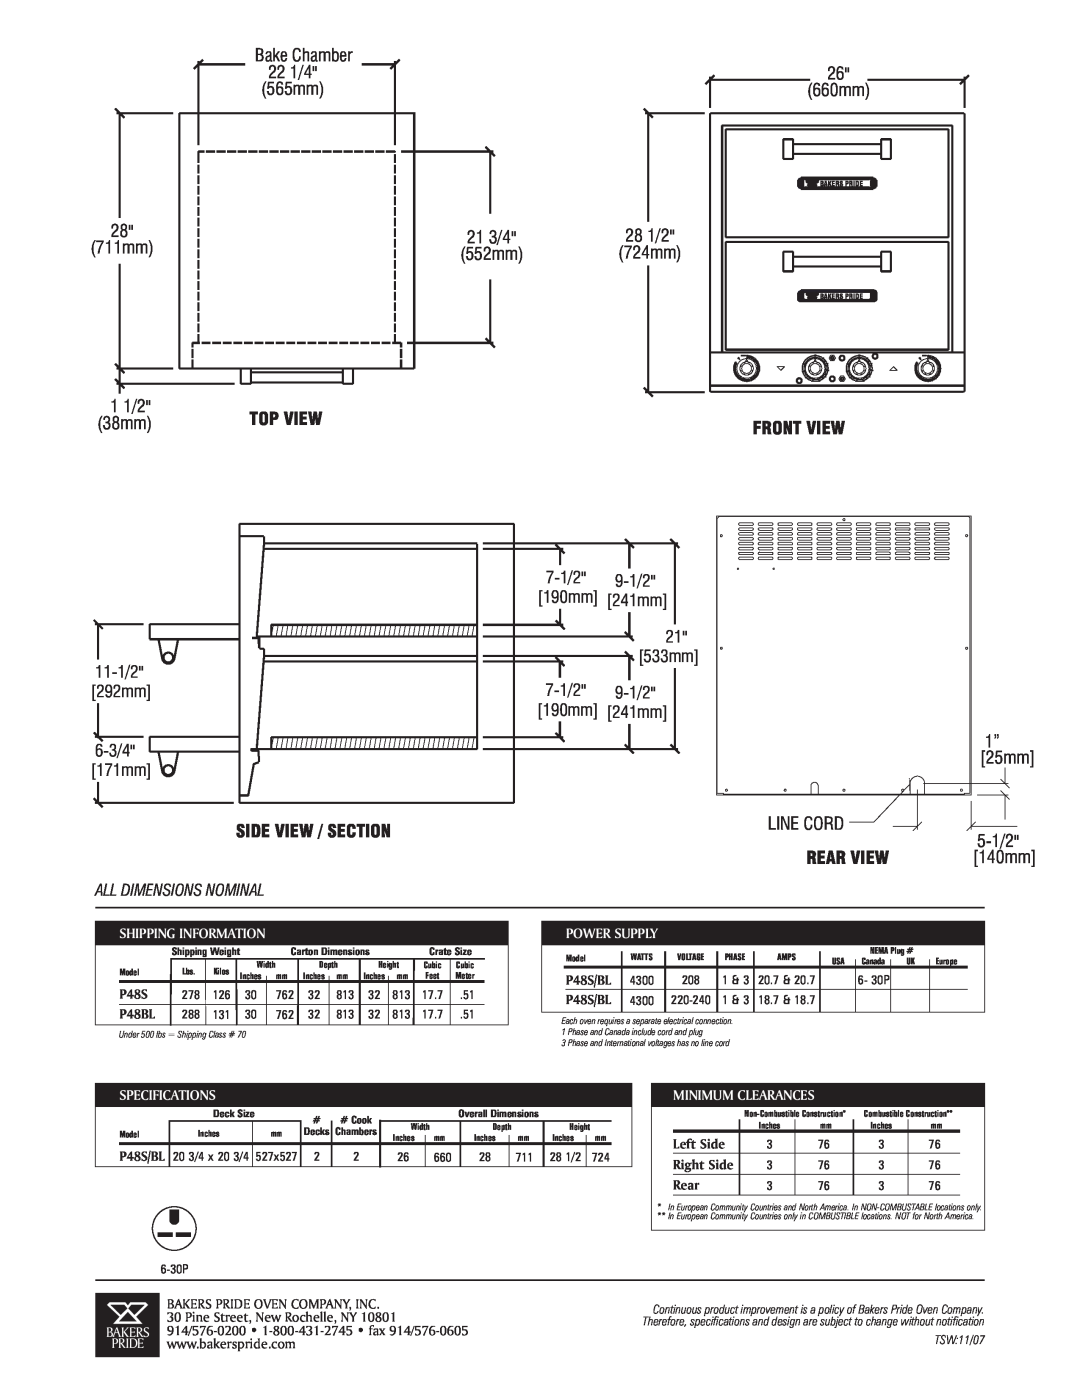 Bakers Pride Oven P48BL specifications 1 1/2, Front View, Side View / Section, Rear View 